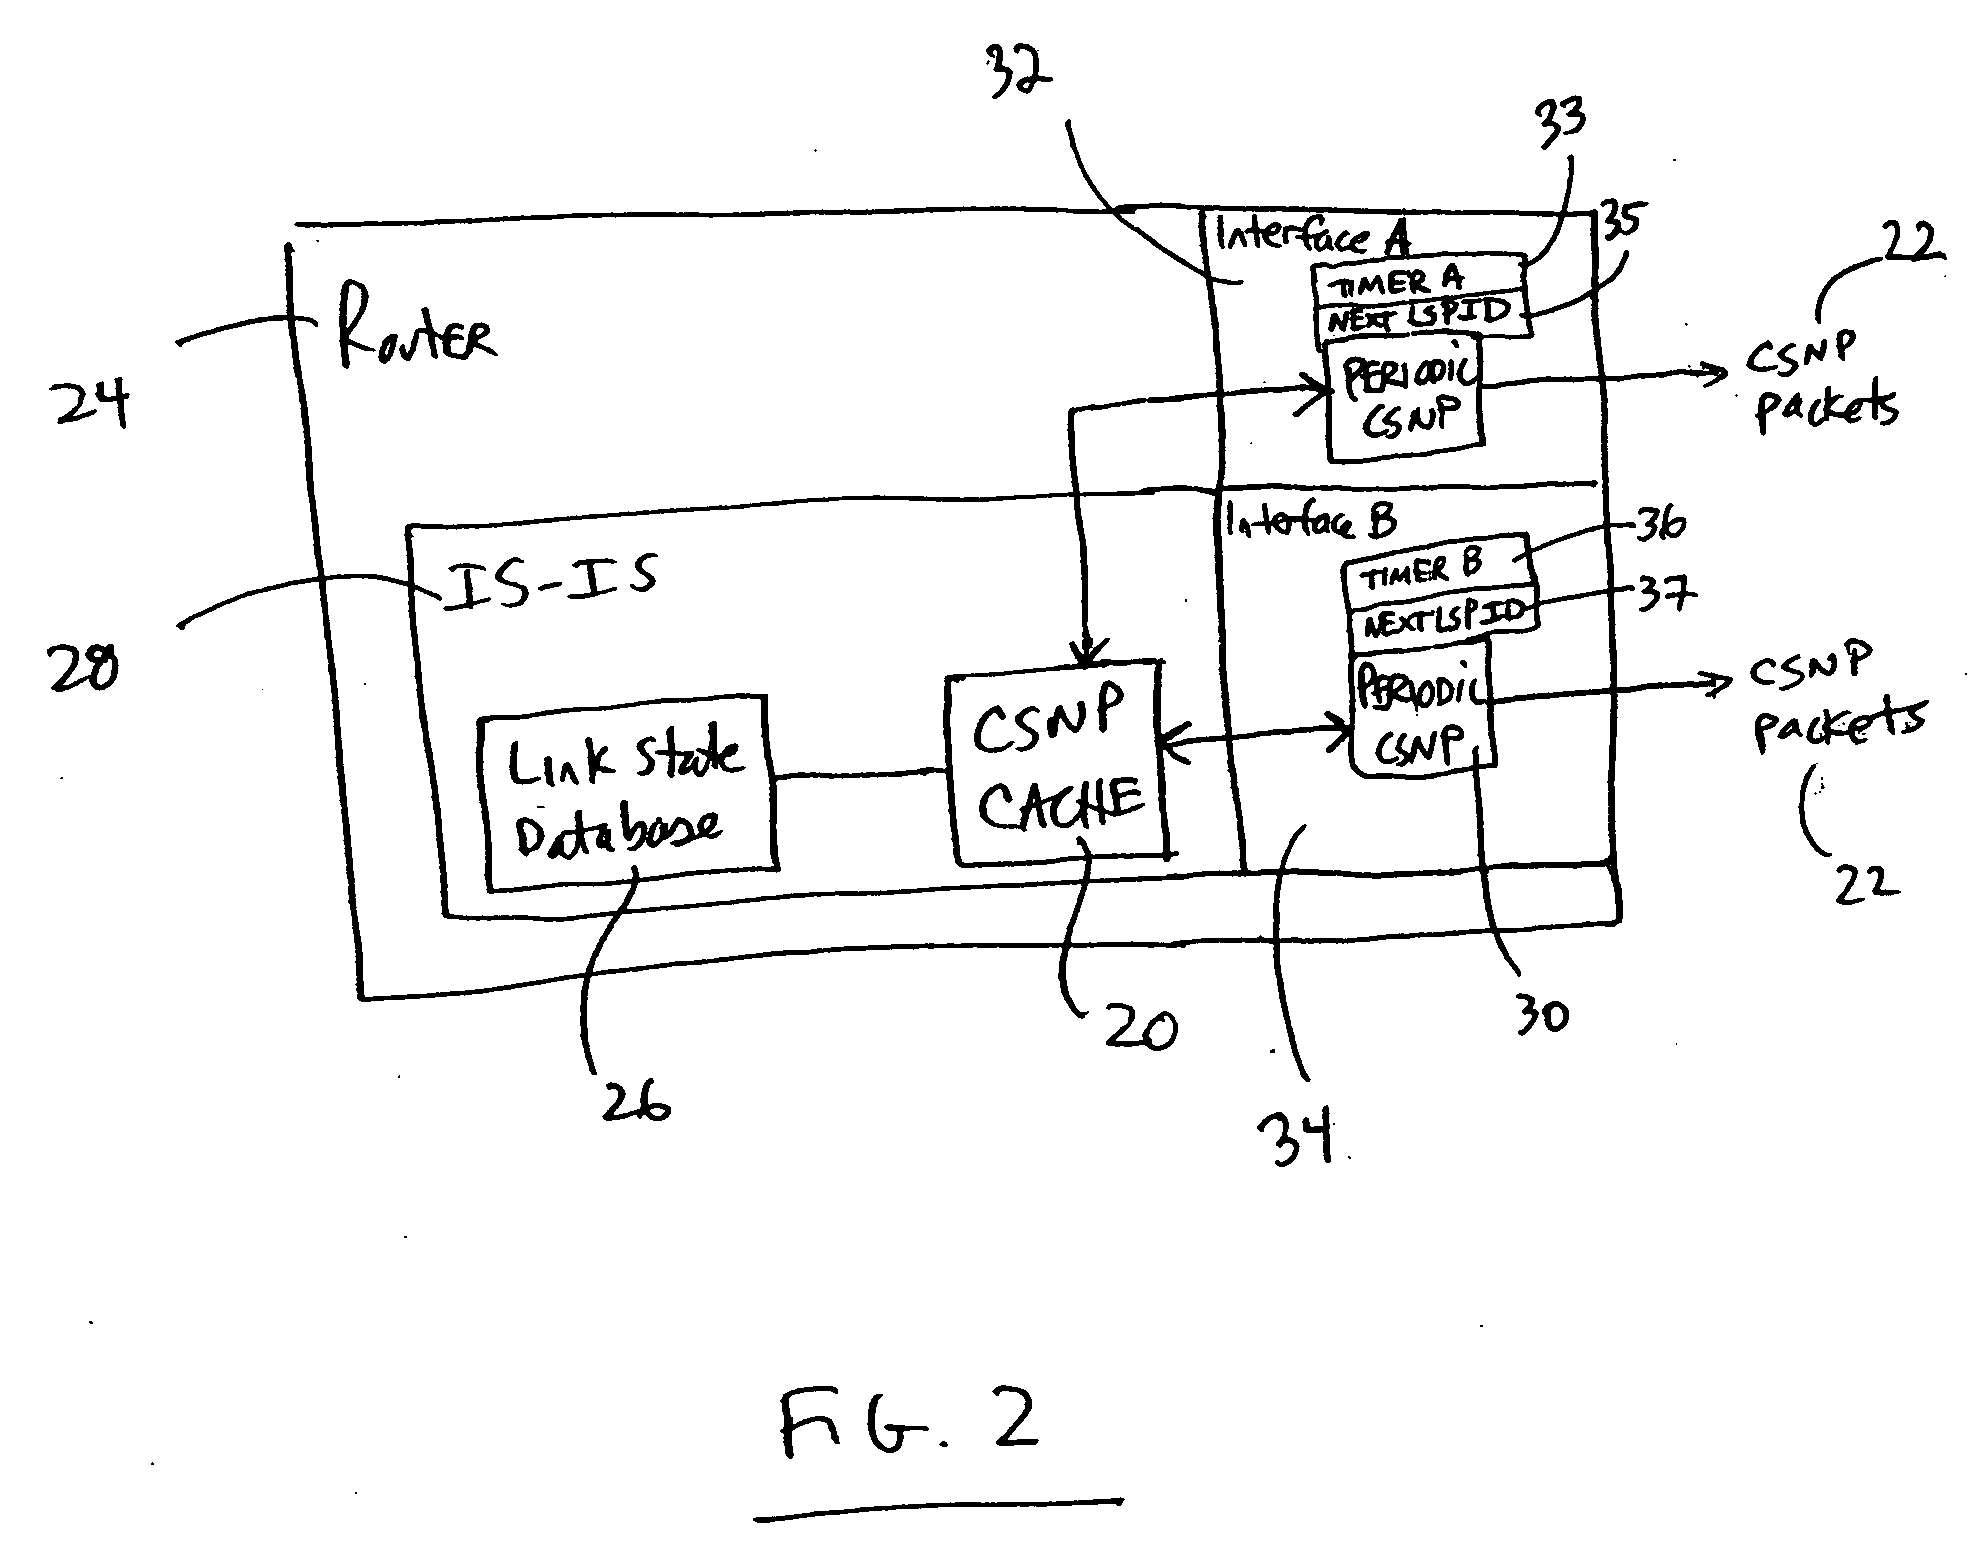 CSNP cache for efficient periodic CSNP in a router